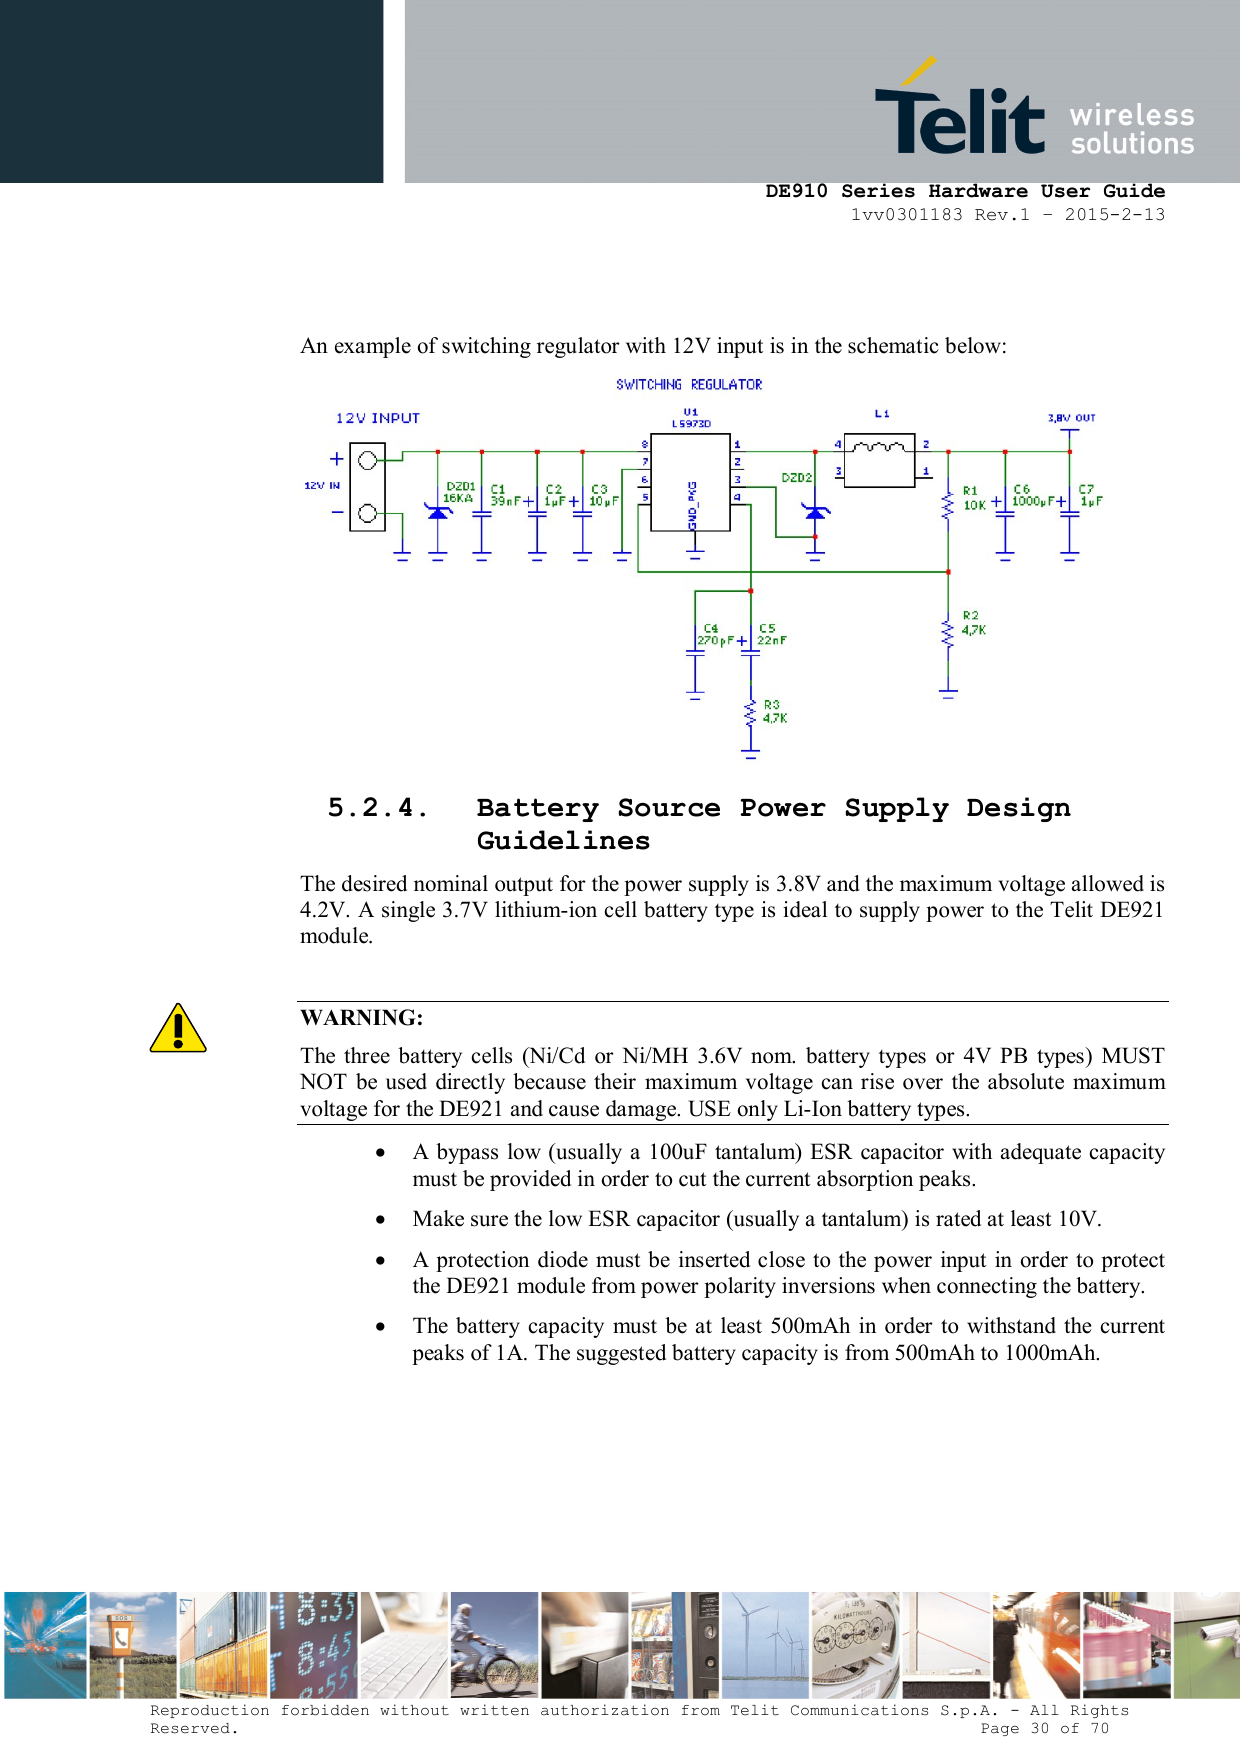      DE910 Series Hardware User Guide 1vv0301183 Rev.1 – 2015-2-13 Reproduction forbidden without written authorization from Telit Communications S.p.A. - All Rights Reserved.                                                                          Page 30 of 70   An example of switching regulator with 12V input is in the schematic below:  5.2.4. Battery Source Power Supply Design Guidelines The desired nominal output for the power supply is 3.8V and the maximum voltage allowed is 4.2V. A single 3.7V lithium-ion cell battery type is ideal to supply power to the Telit DE921 module.  WARNING: The  three  battery  cells  (Ni/Cd  or  Ni/MH  3.6V  nom.  battery  types  or  4V  PB  types)  MUST NOT  be used  directly because their  maximum  voltage  can rise  over  the absolute  maximum voltage for the DE921 and cause damage. USE only Li-Ion battery types.  A  bypass  low (usually a 100uF tantalum) ESR capacitor with adequate capacity must be provided in order to cut the current absorption peaks.   Make sure the low ESR capacitor (usually a tantalum) is rated at least 10V.   A  protection  diode  must be inserted  close to the power input in  order to  protect the DE921 module from power polarity inversions when connecting the battery.  The  battery capacity  must  be  at  least  500mAh in order to  withstand the current peaks of 1A. The suggested battery capacity is from 500mAh to 1000mAh.     